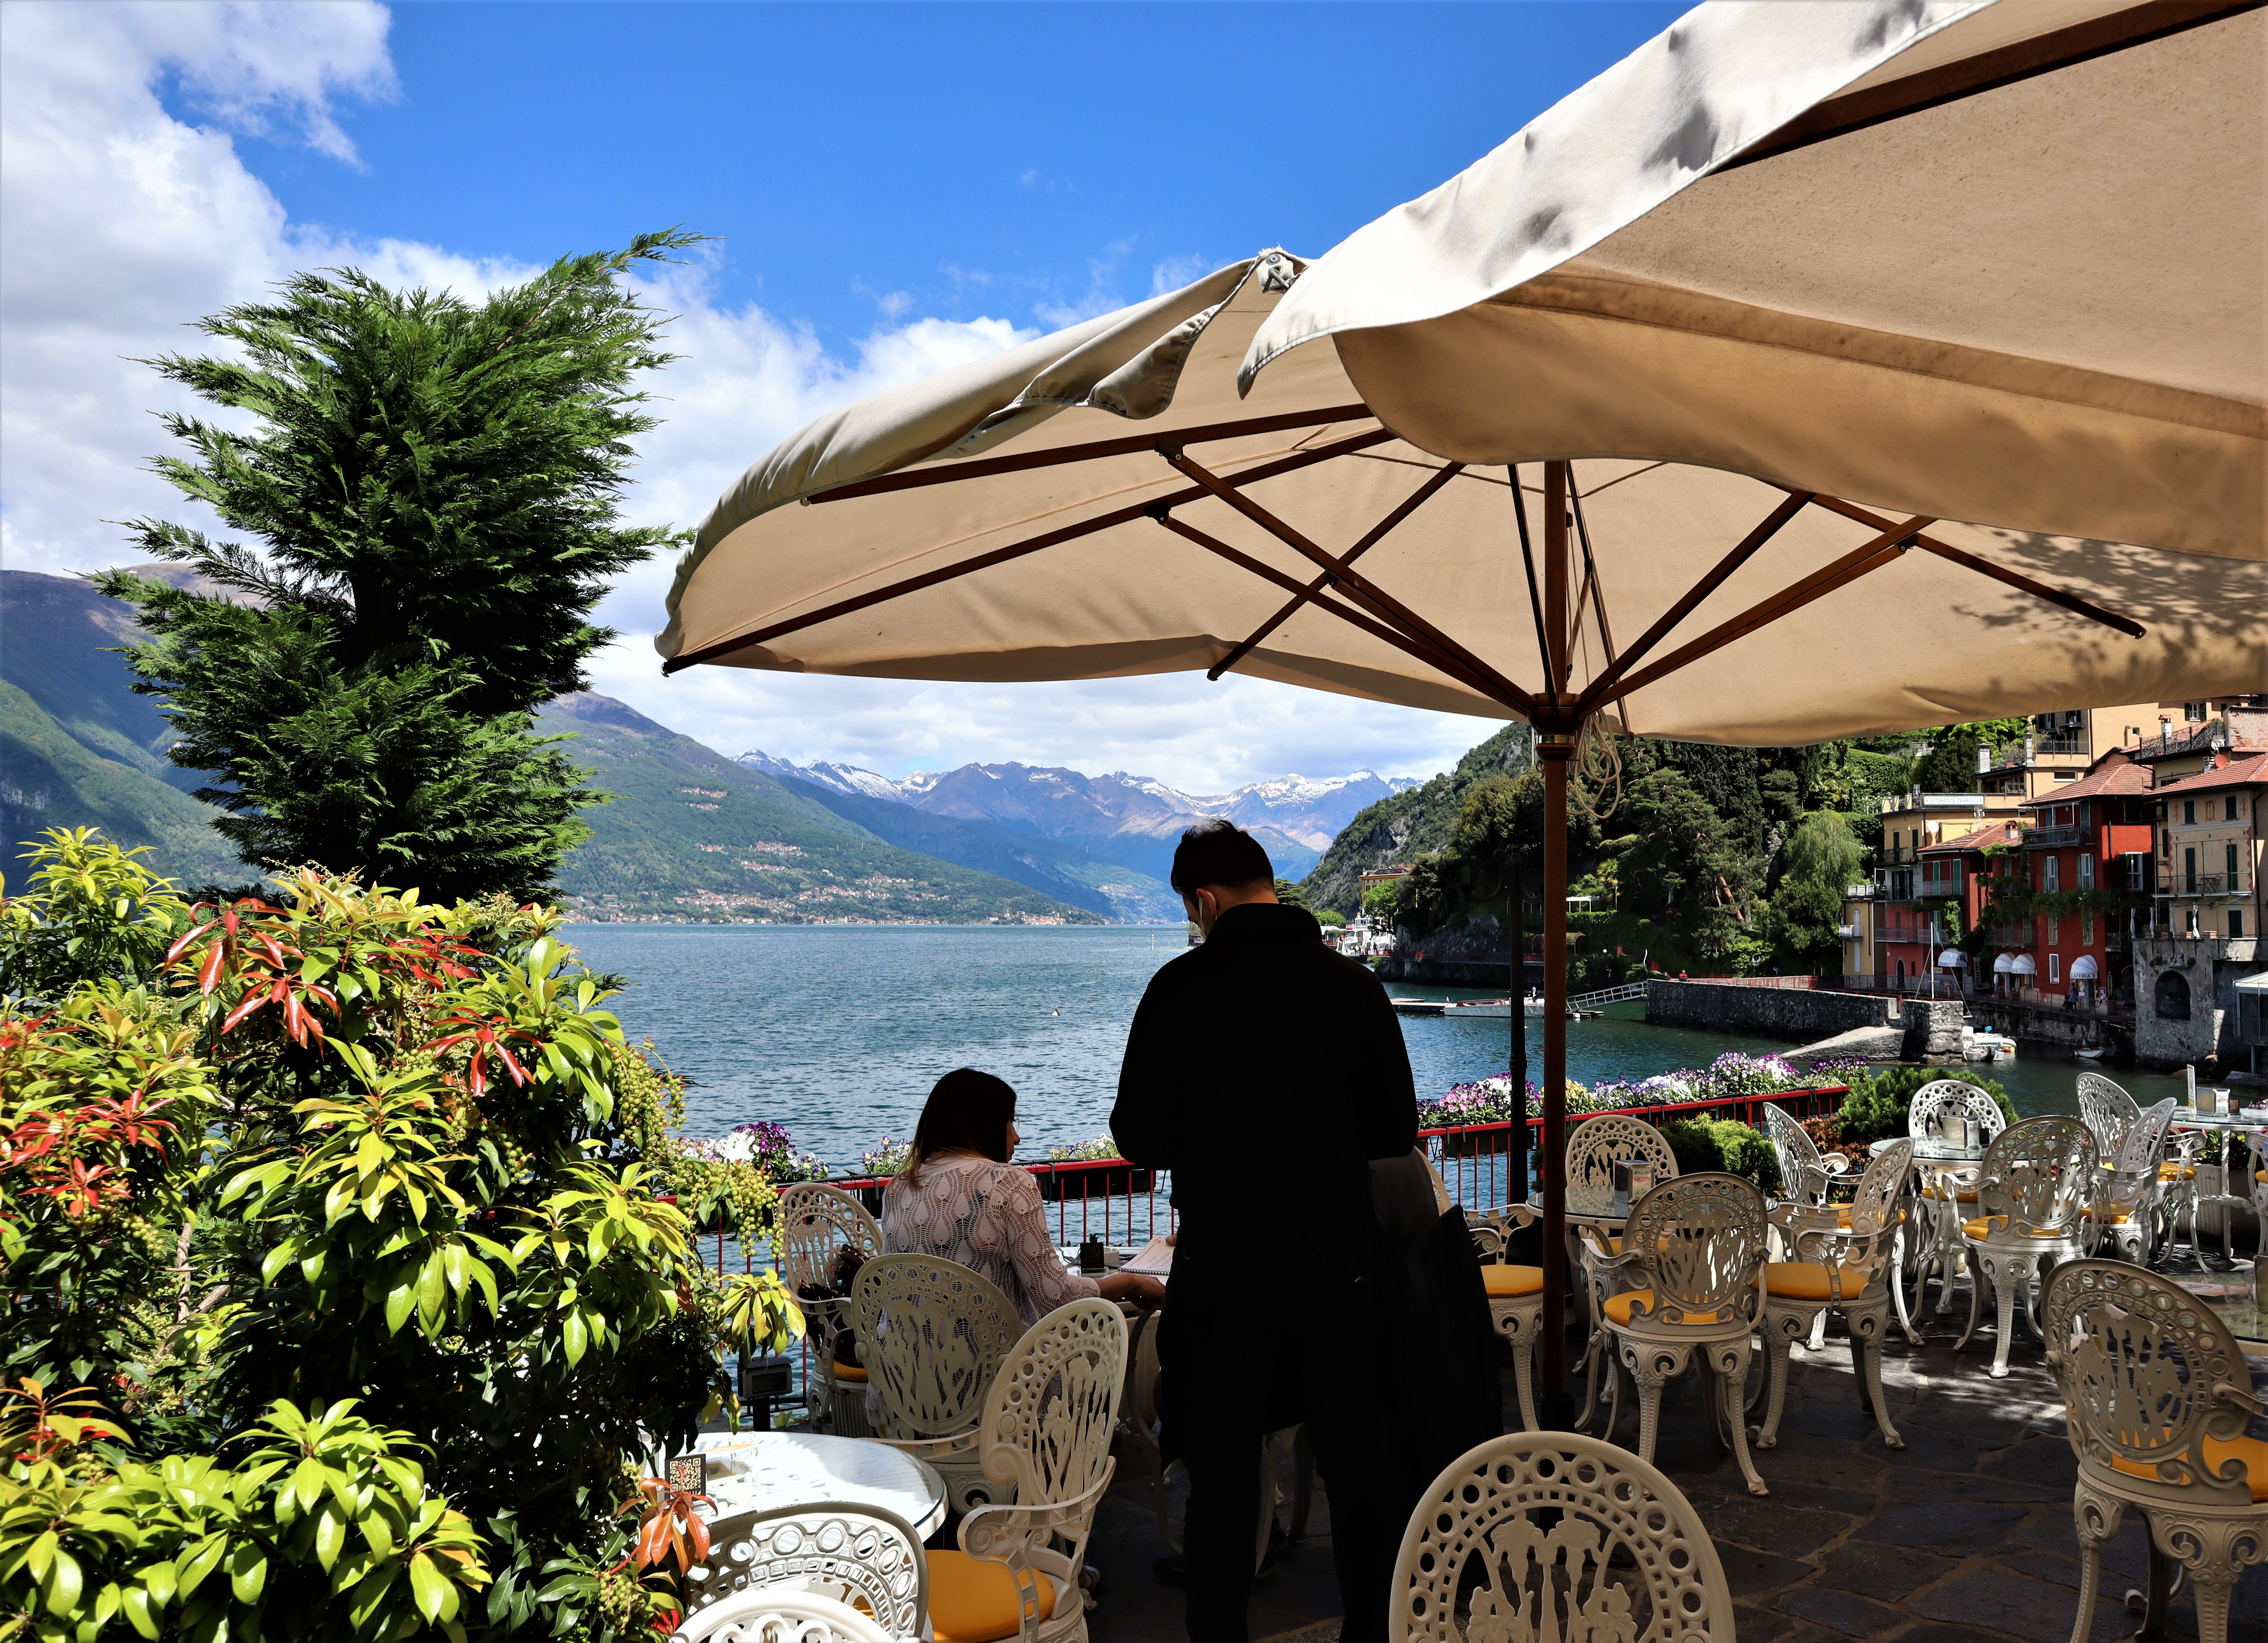 Lunching in Varenna, photo by e-borghi